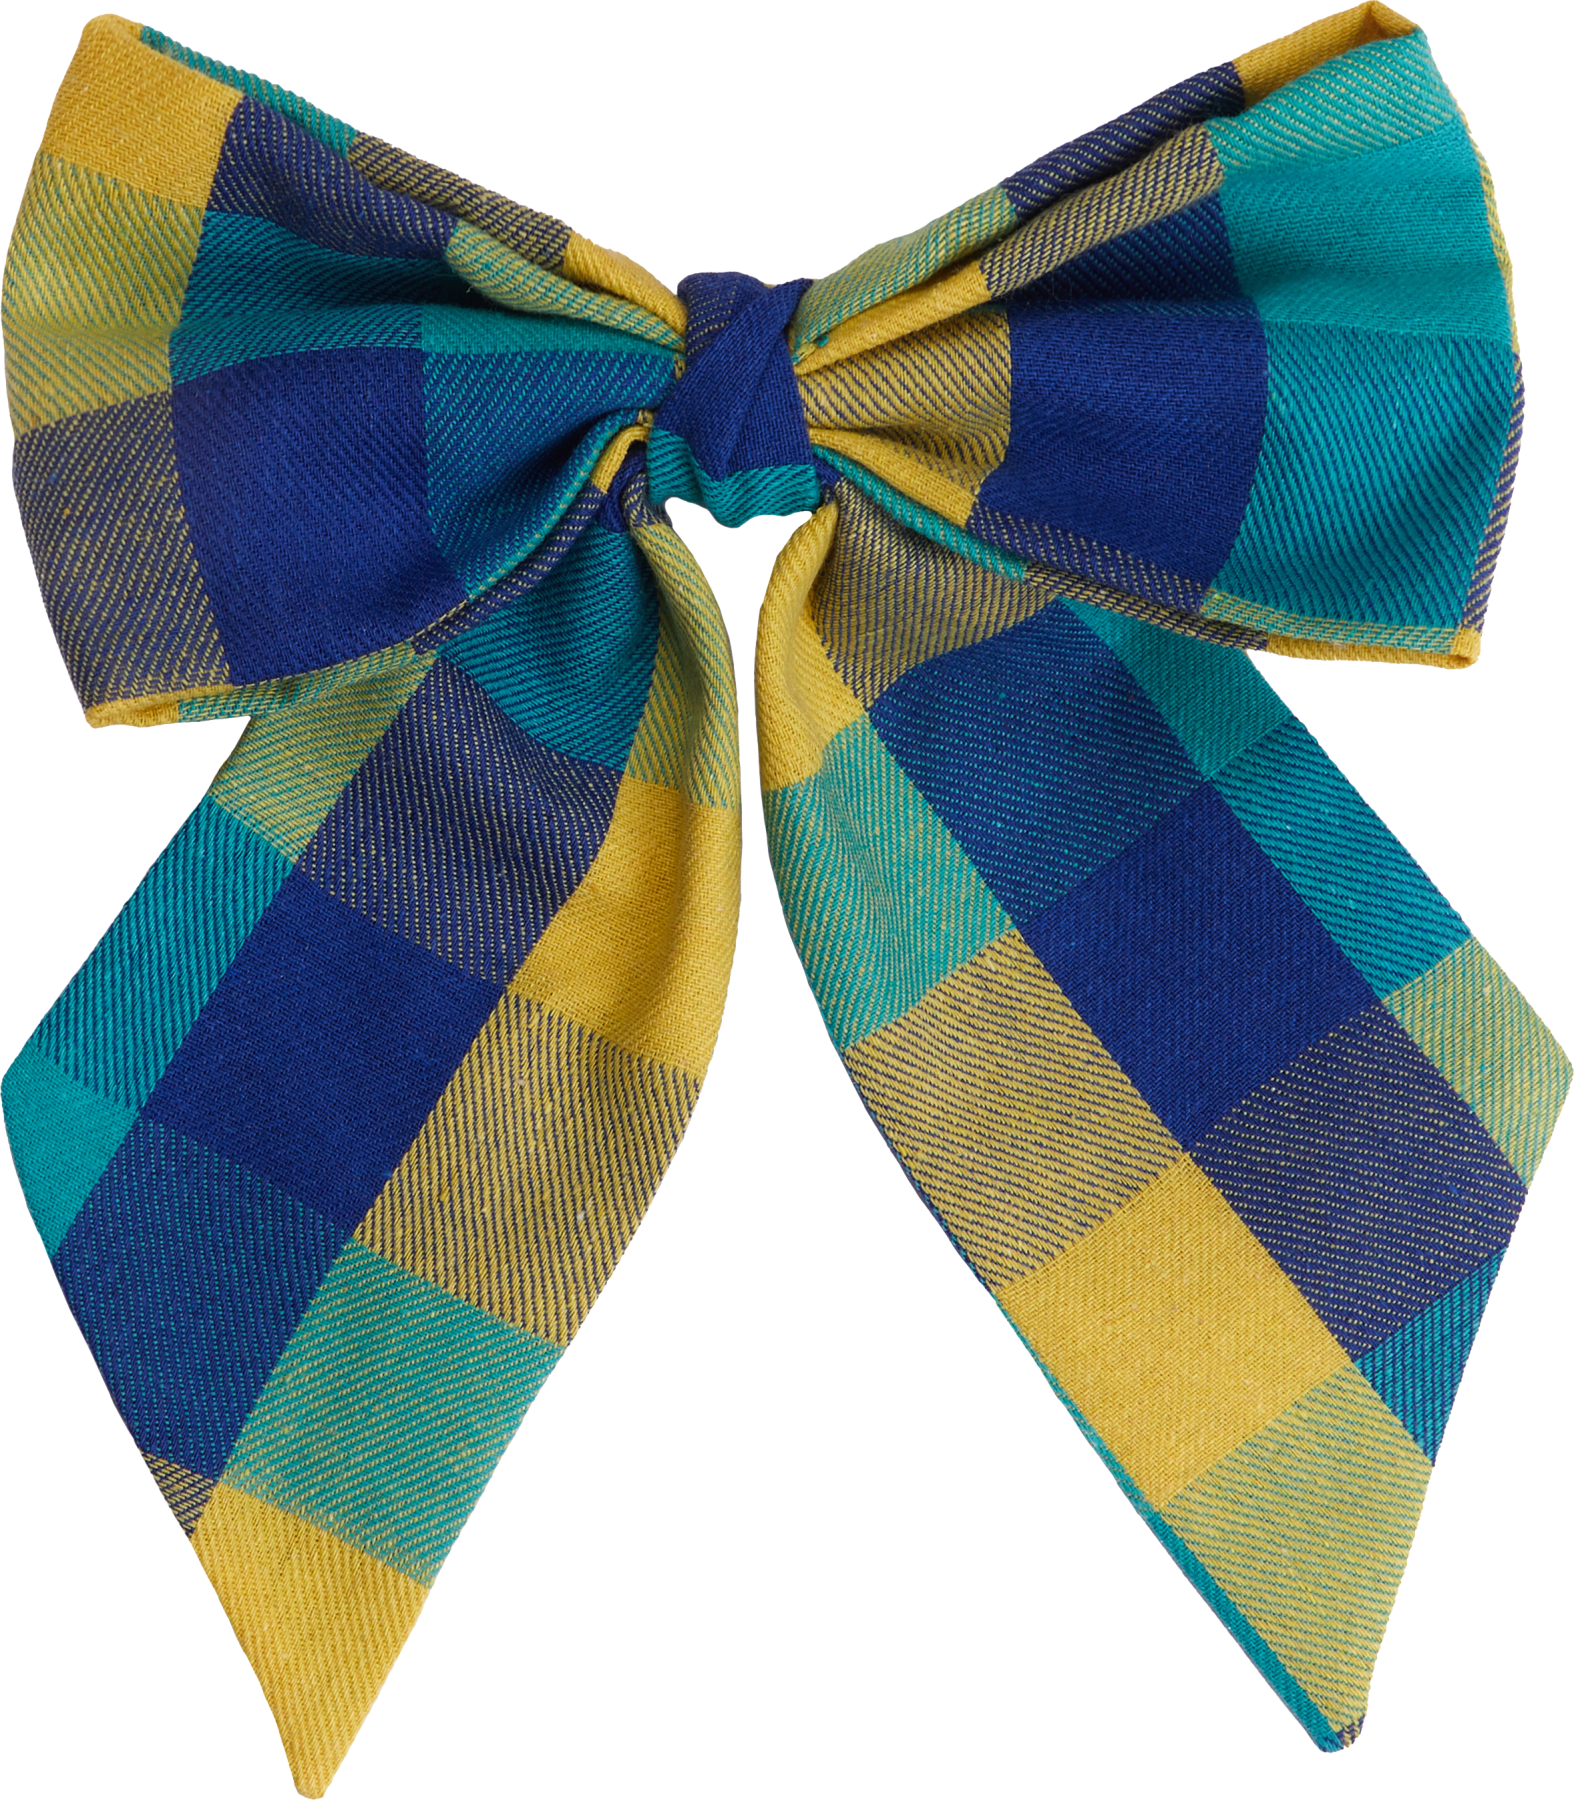 Yellow and blue checkered bow